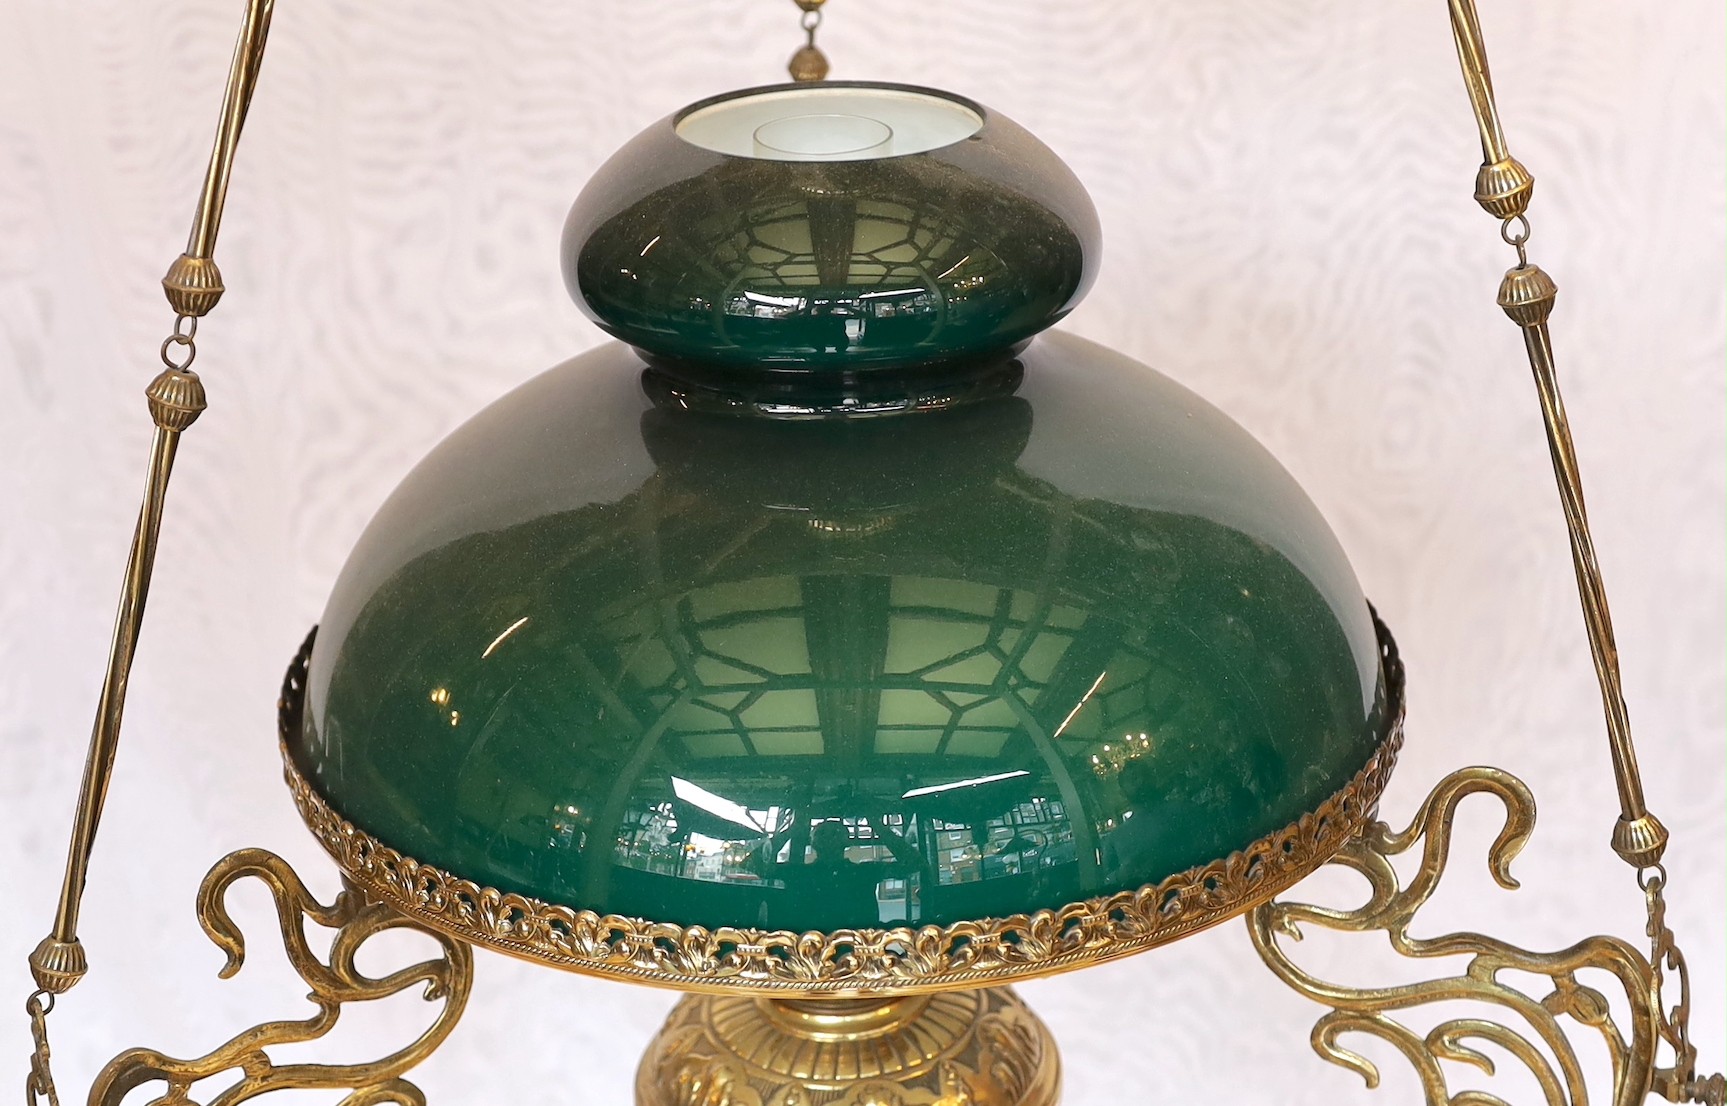 A 19th century French embossed brass counterbalanced hanging oil lamp with opaque glass shade, height 110cm. width 50cm